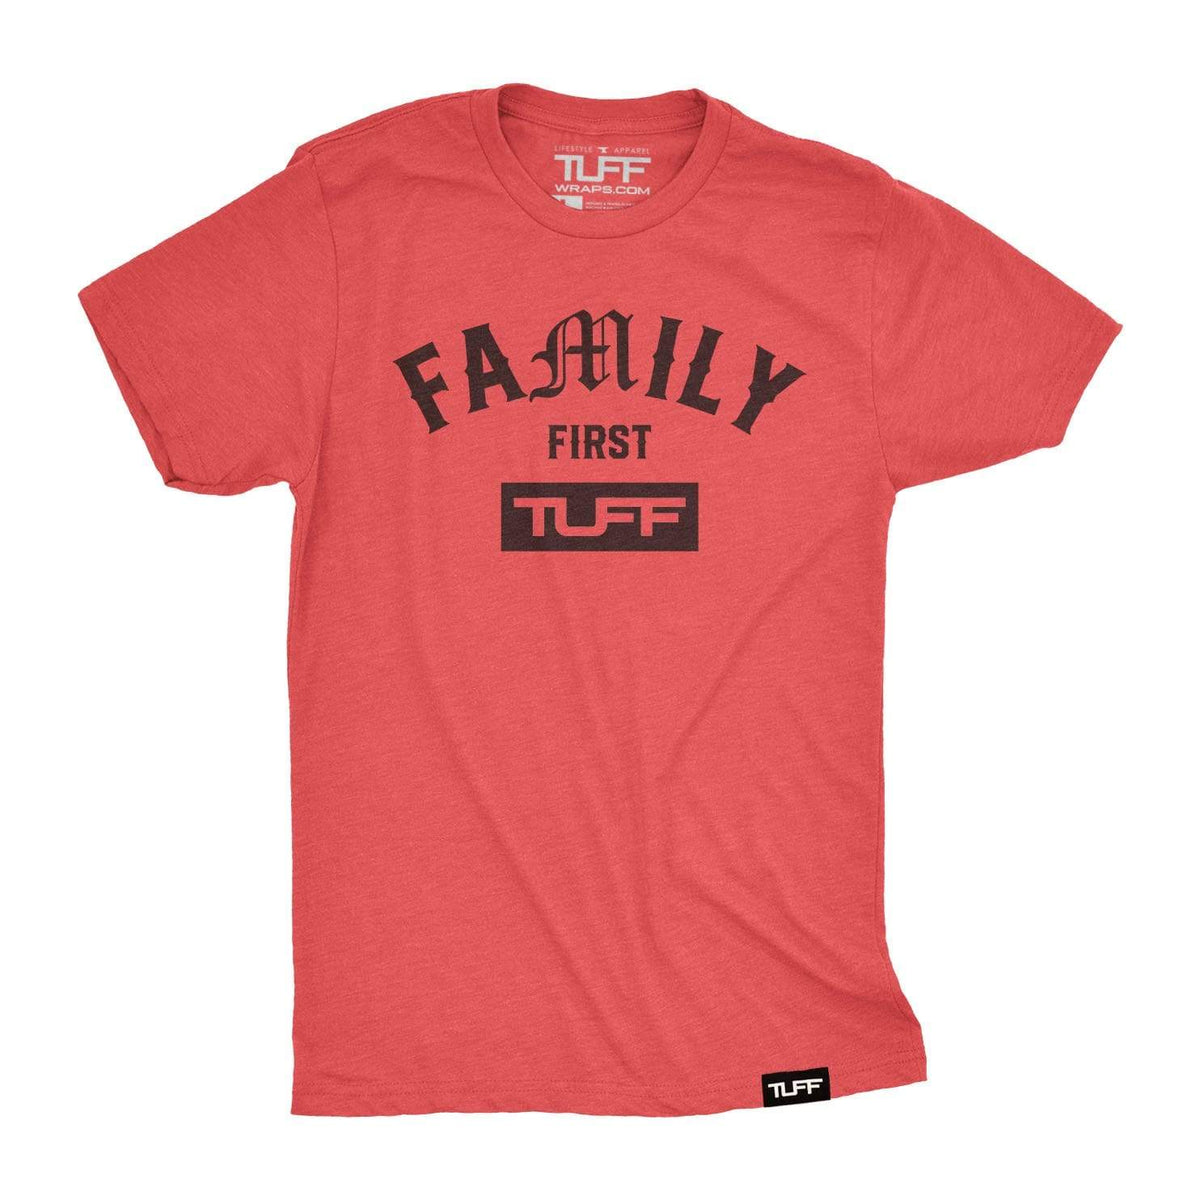 Family First Tee S / Vintage Red TuffWraps.com